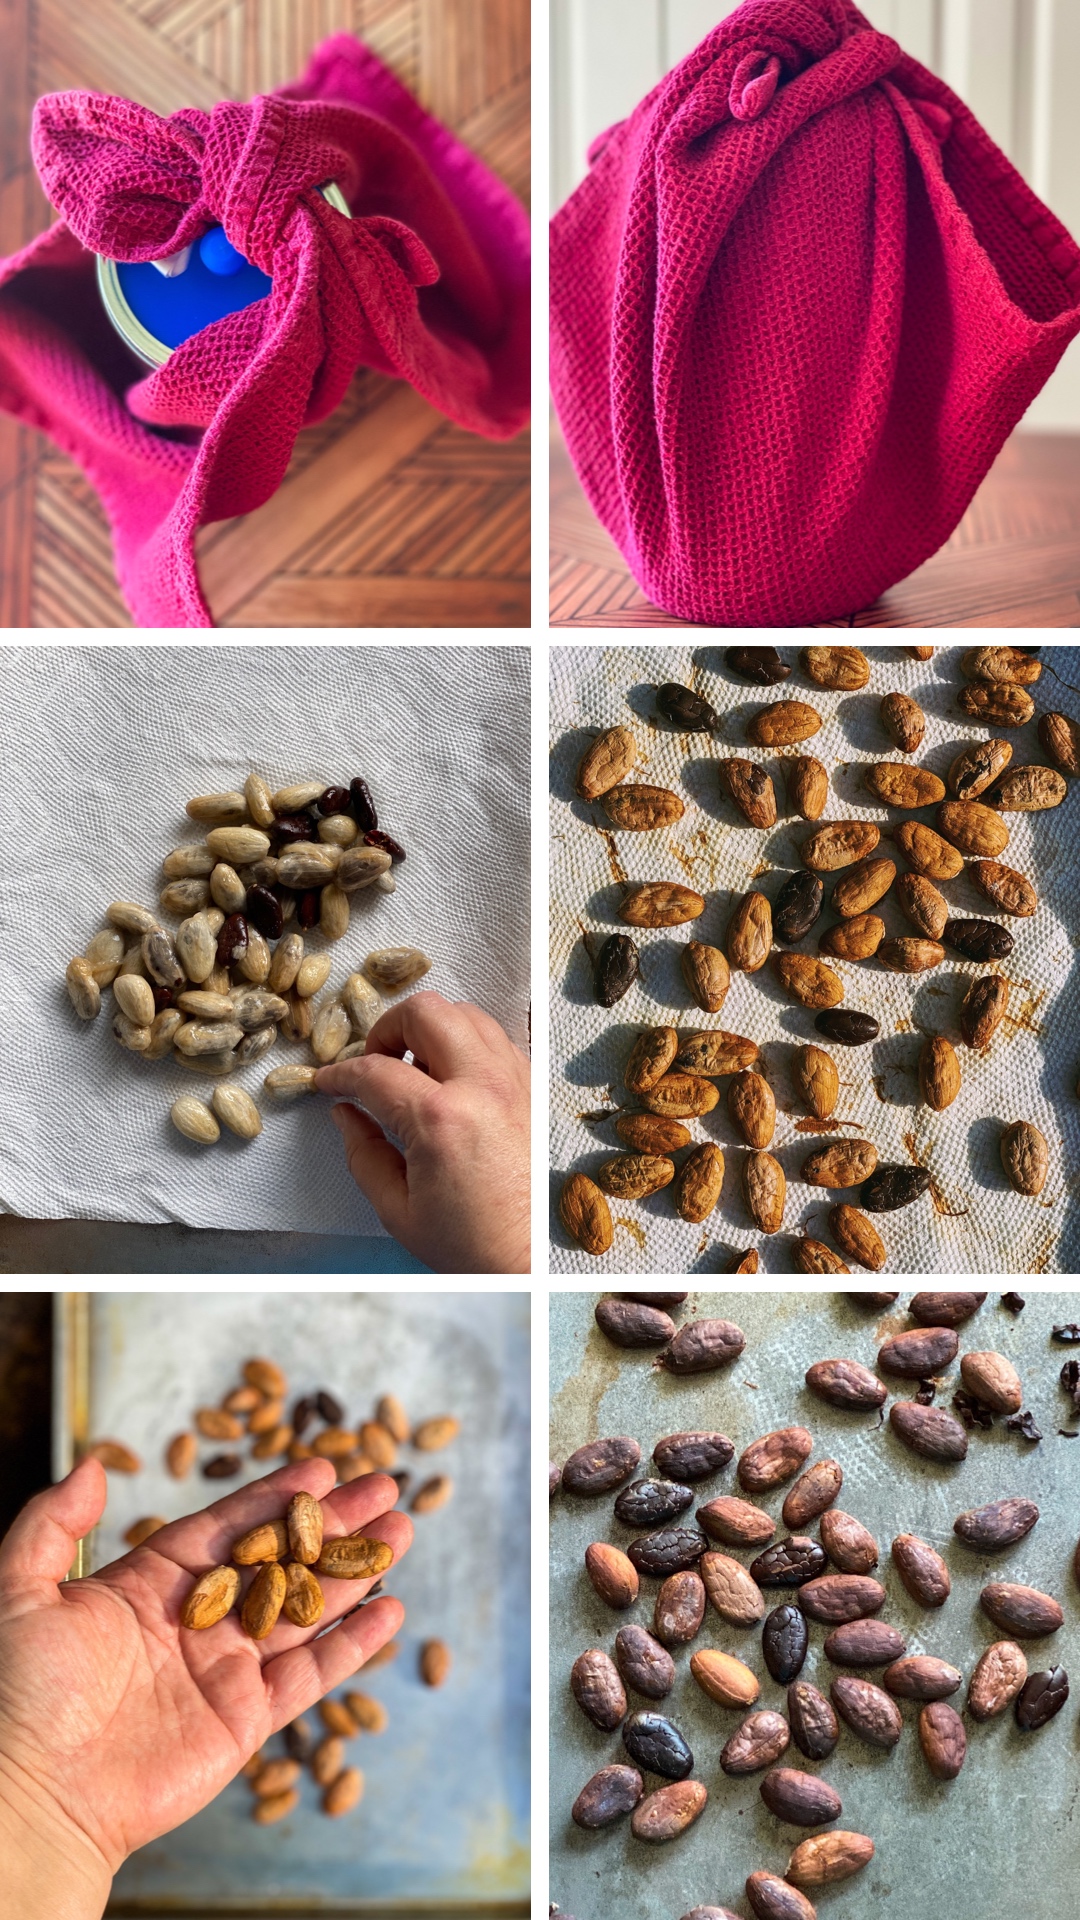 A collage showing how to process cacao